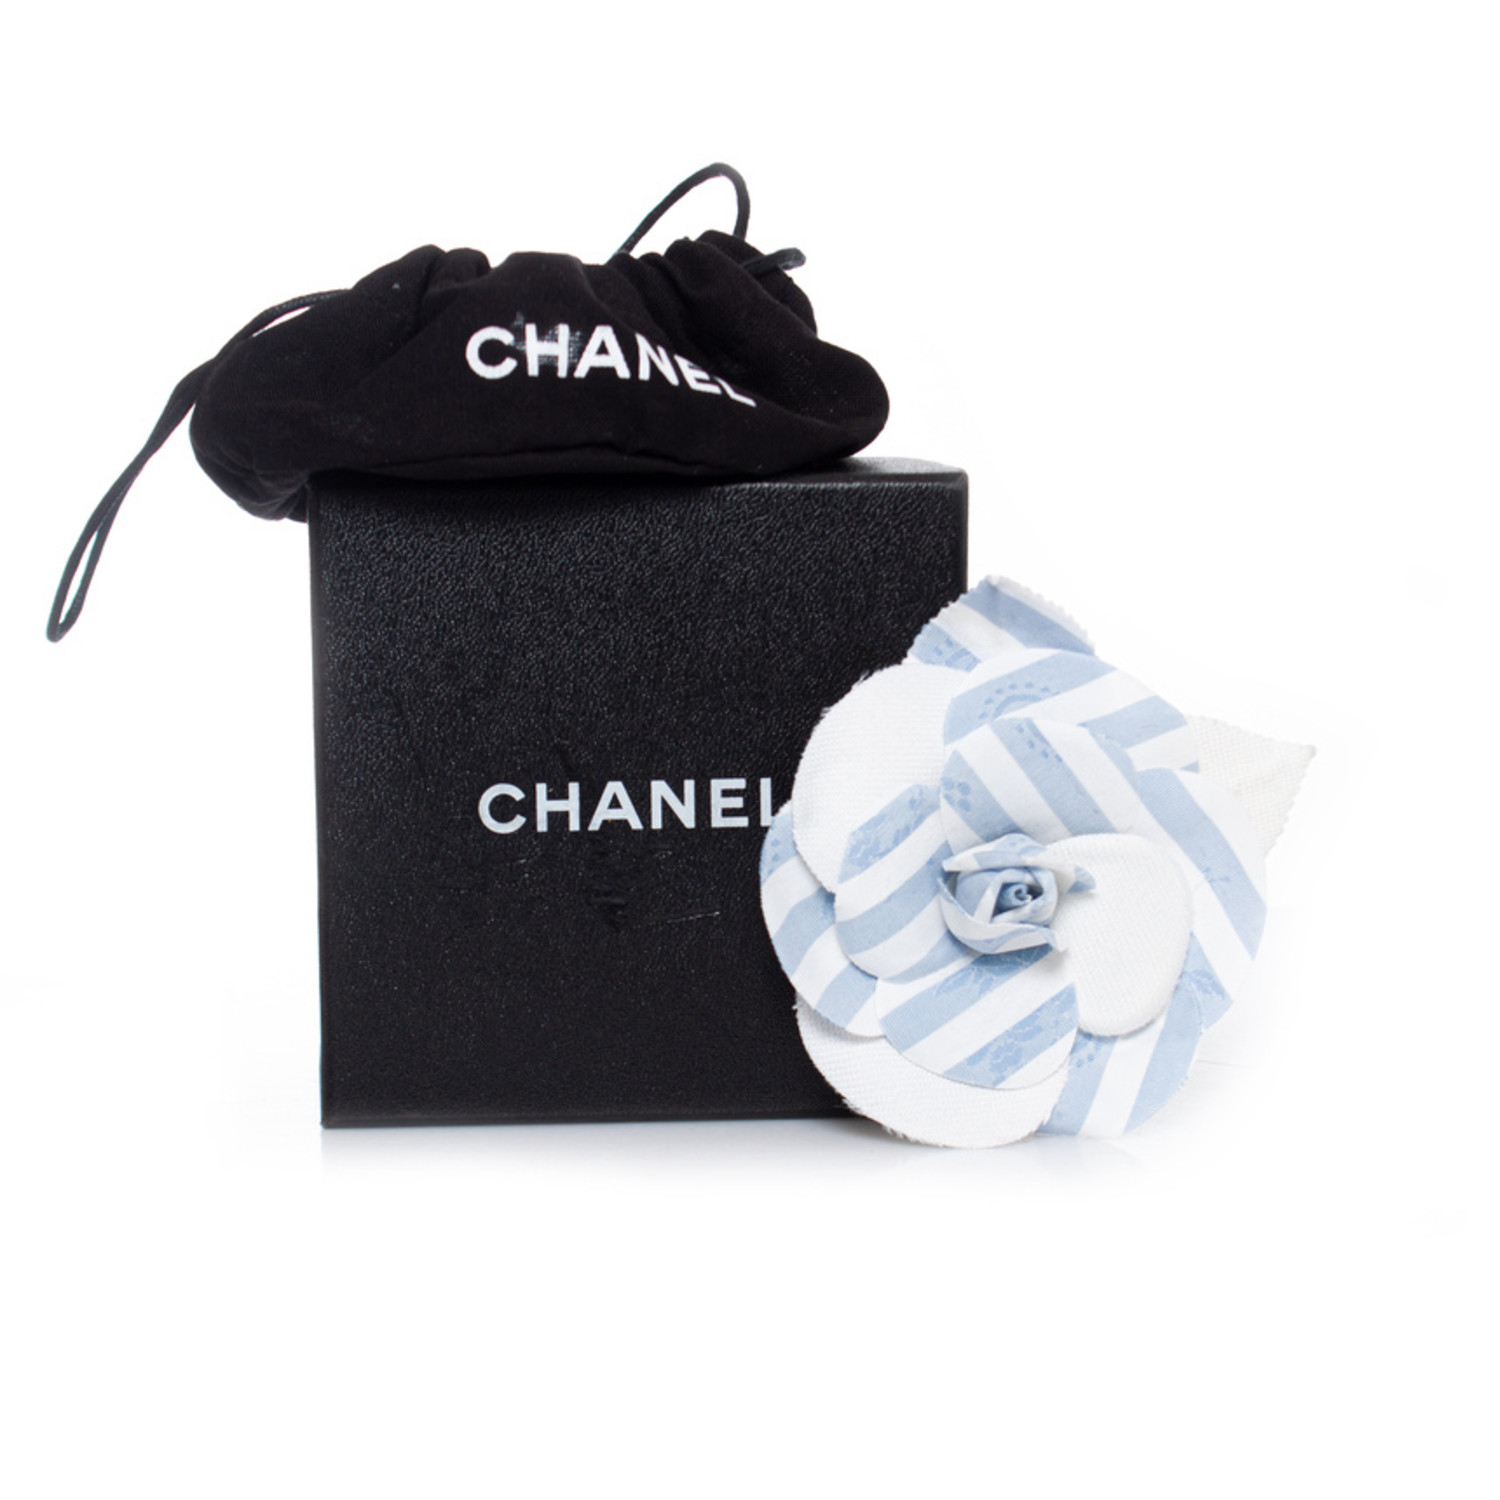 Chanel Style Enameled Camellia with Bow and Charms Keychain/Bag Charm